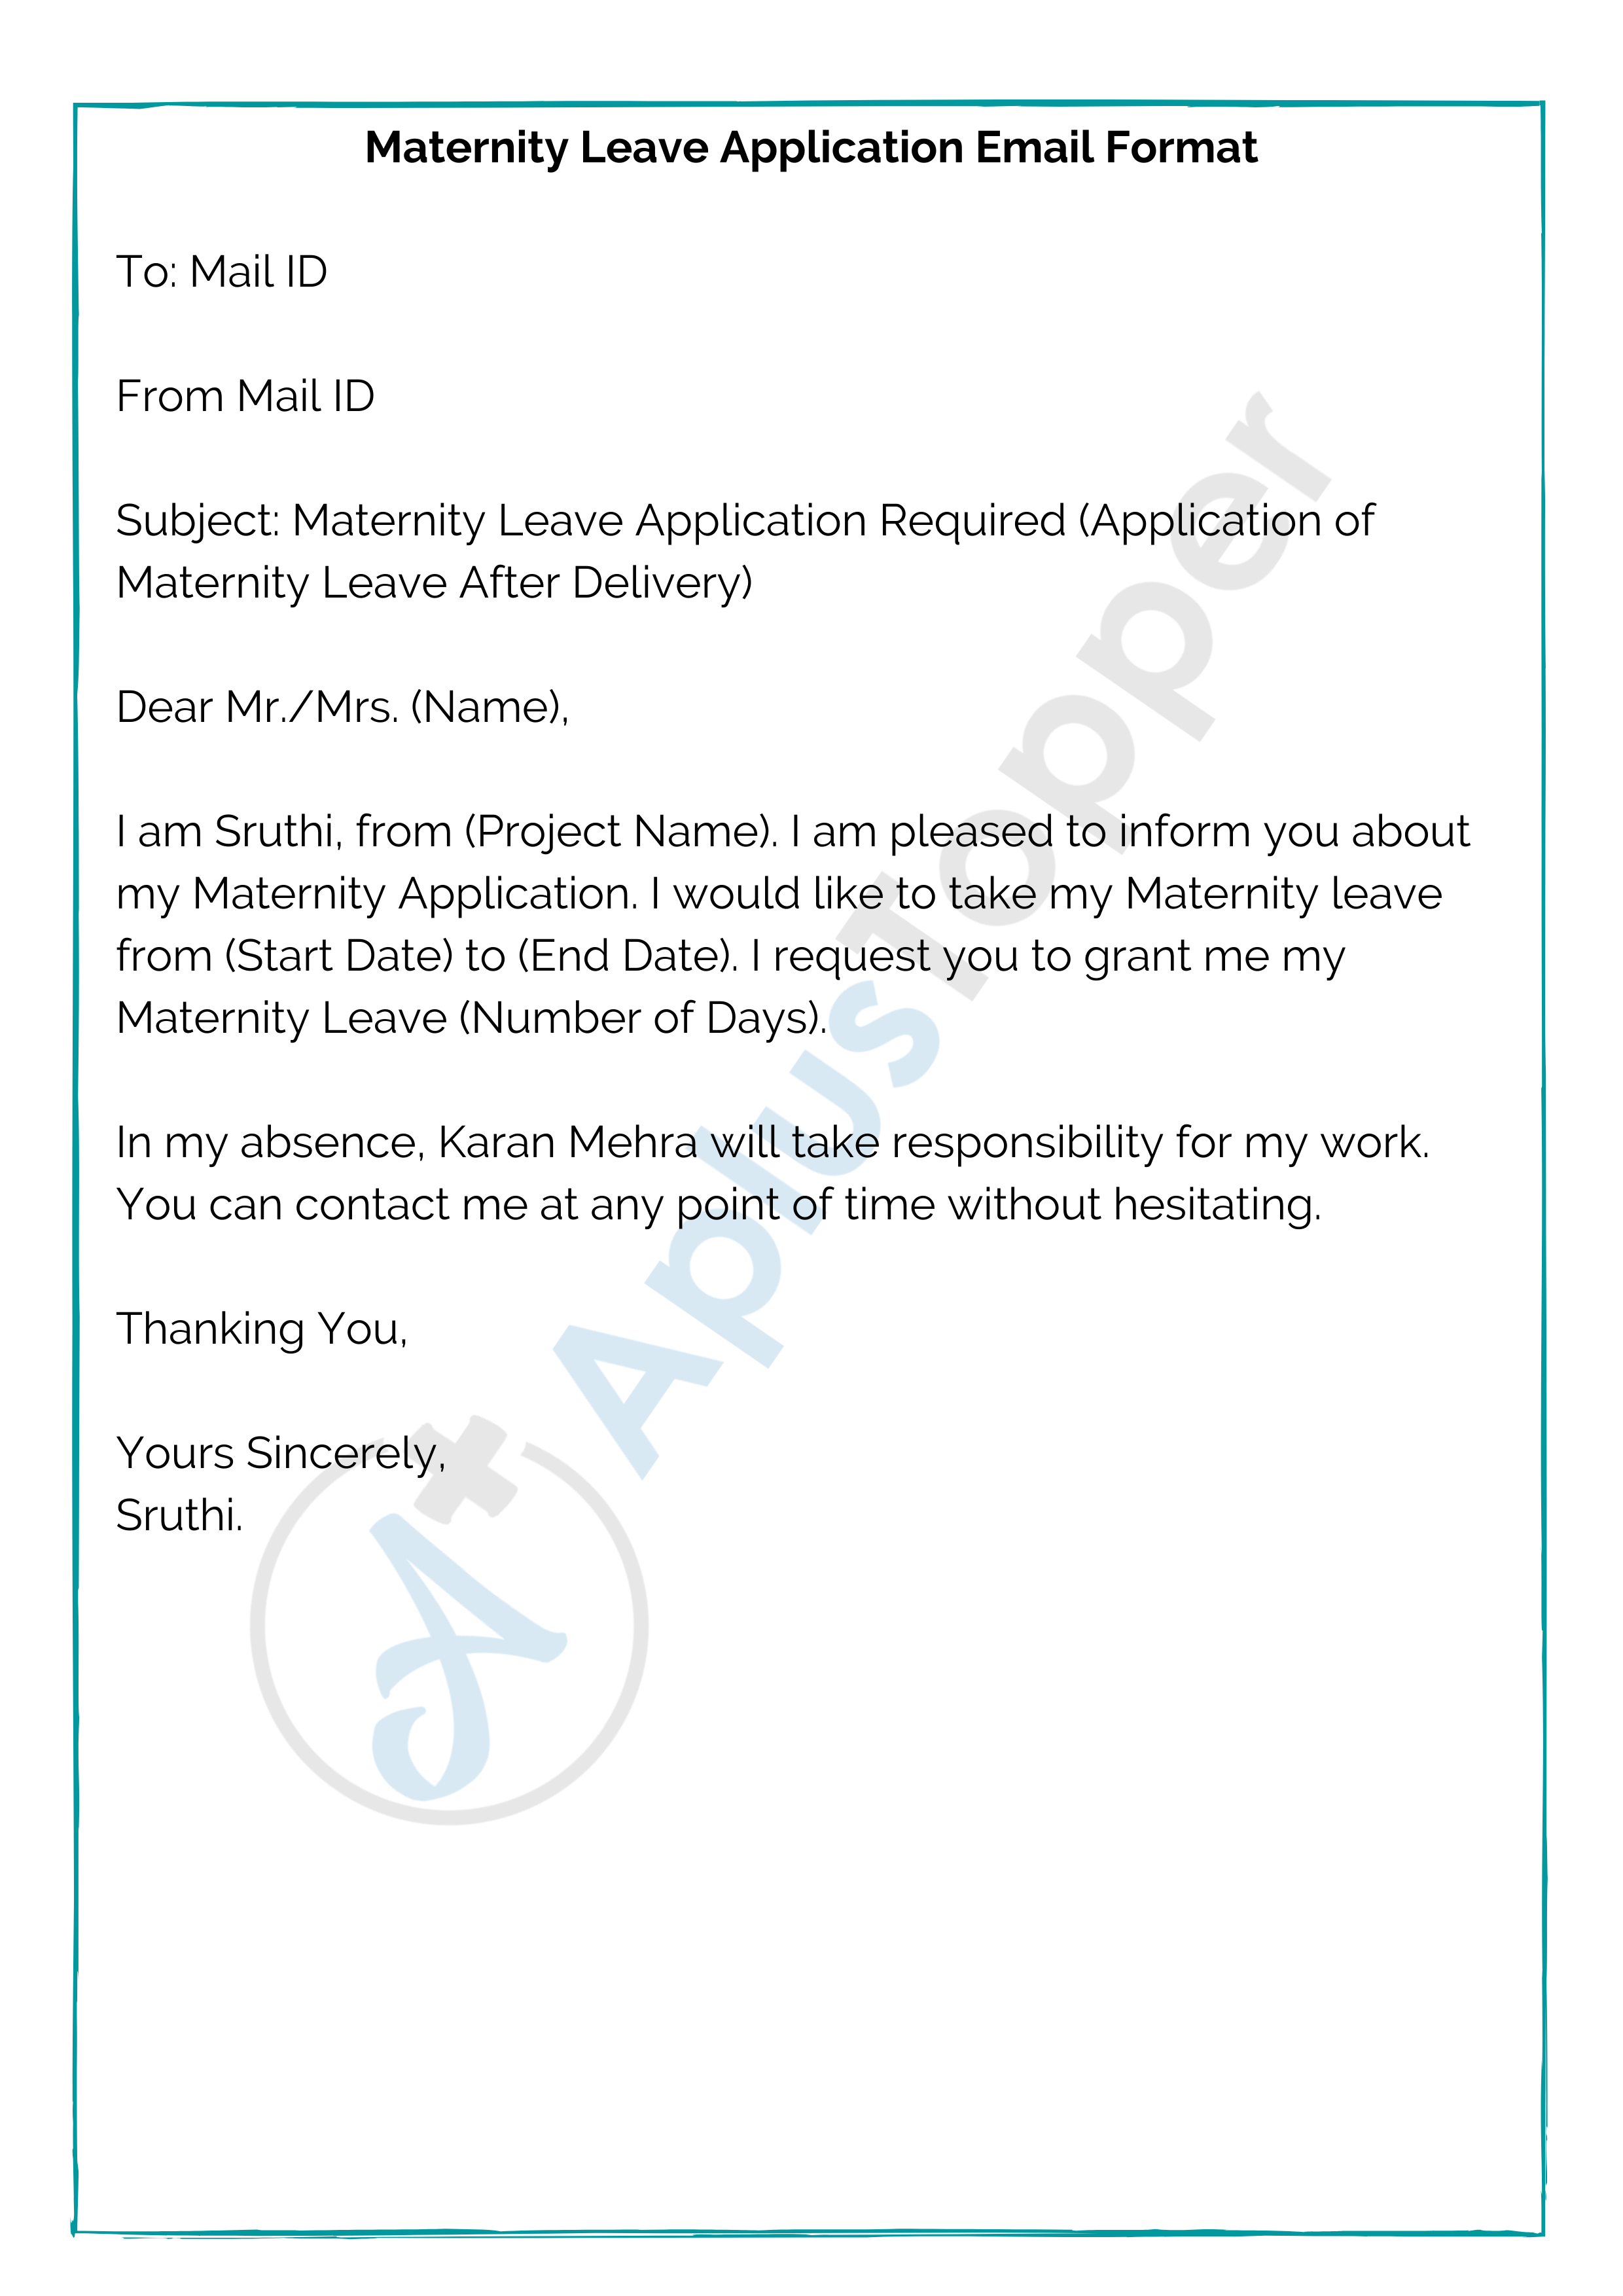 how to write child care leave application letter